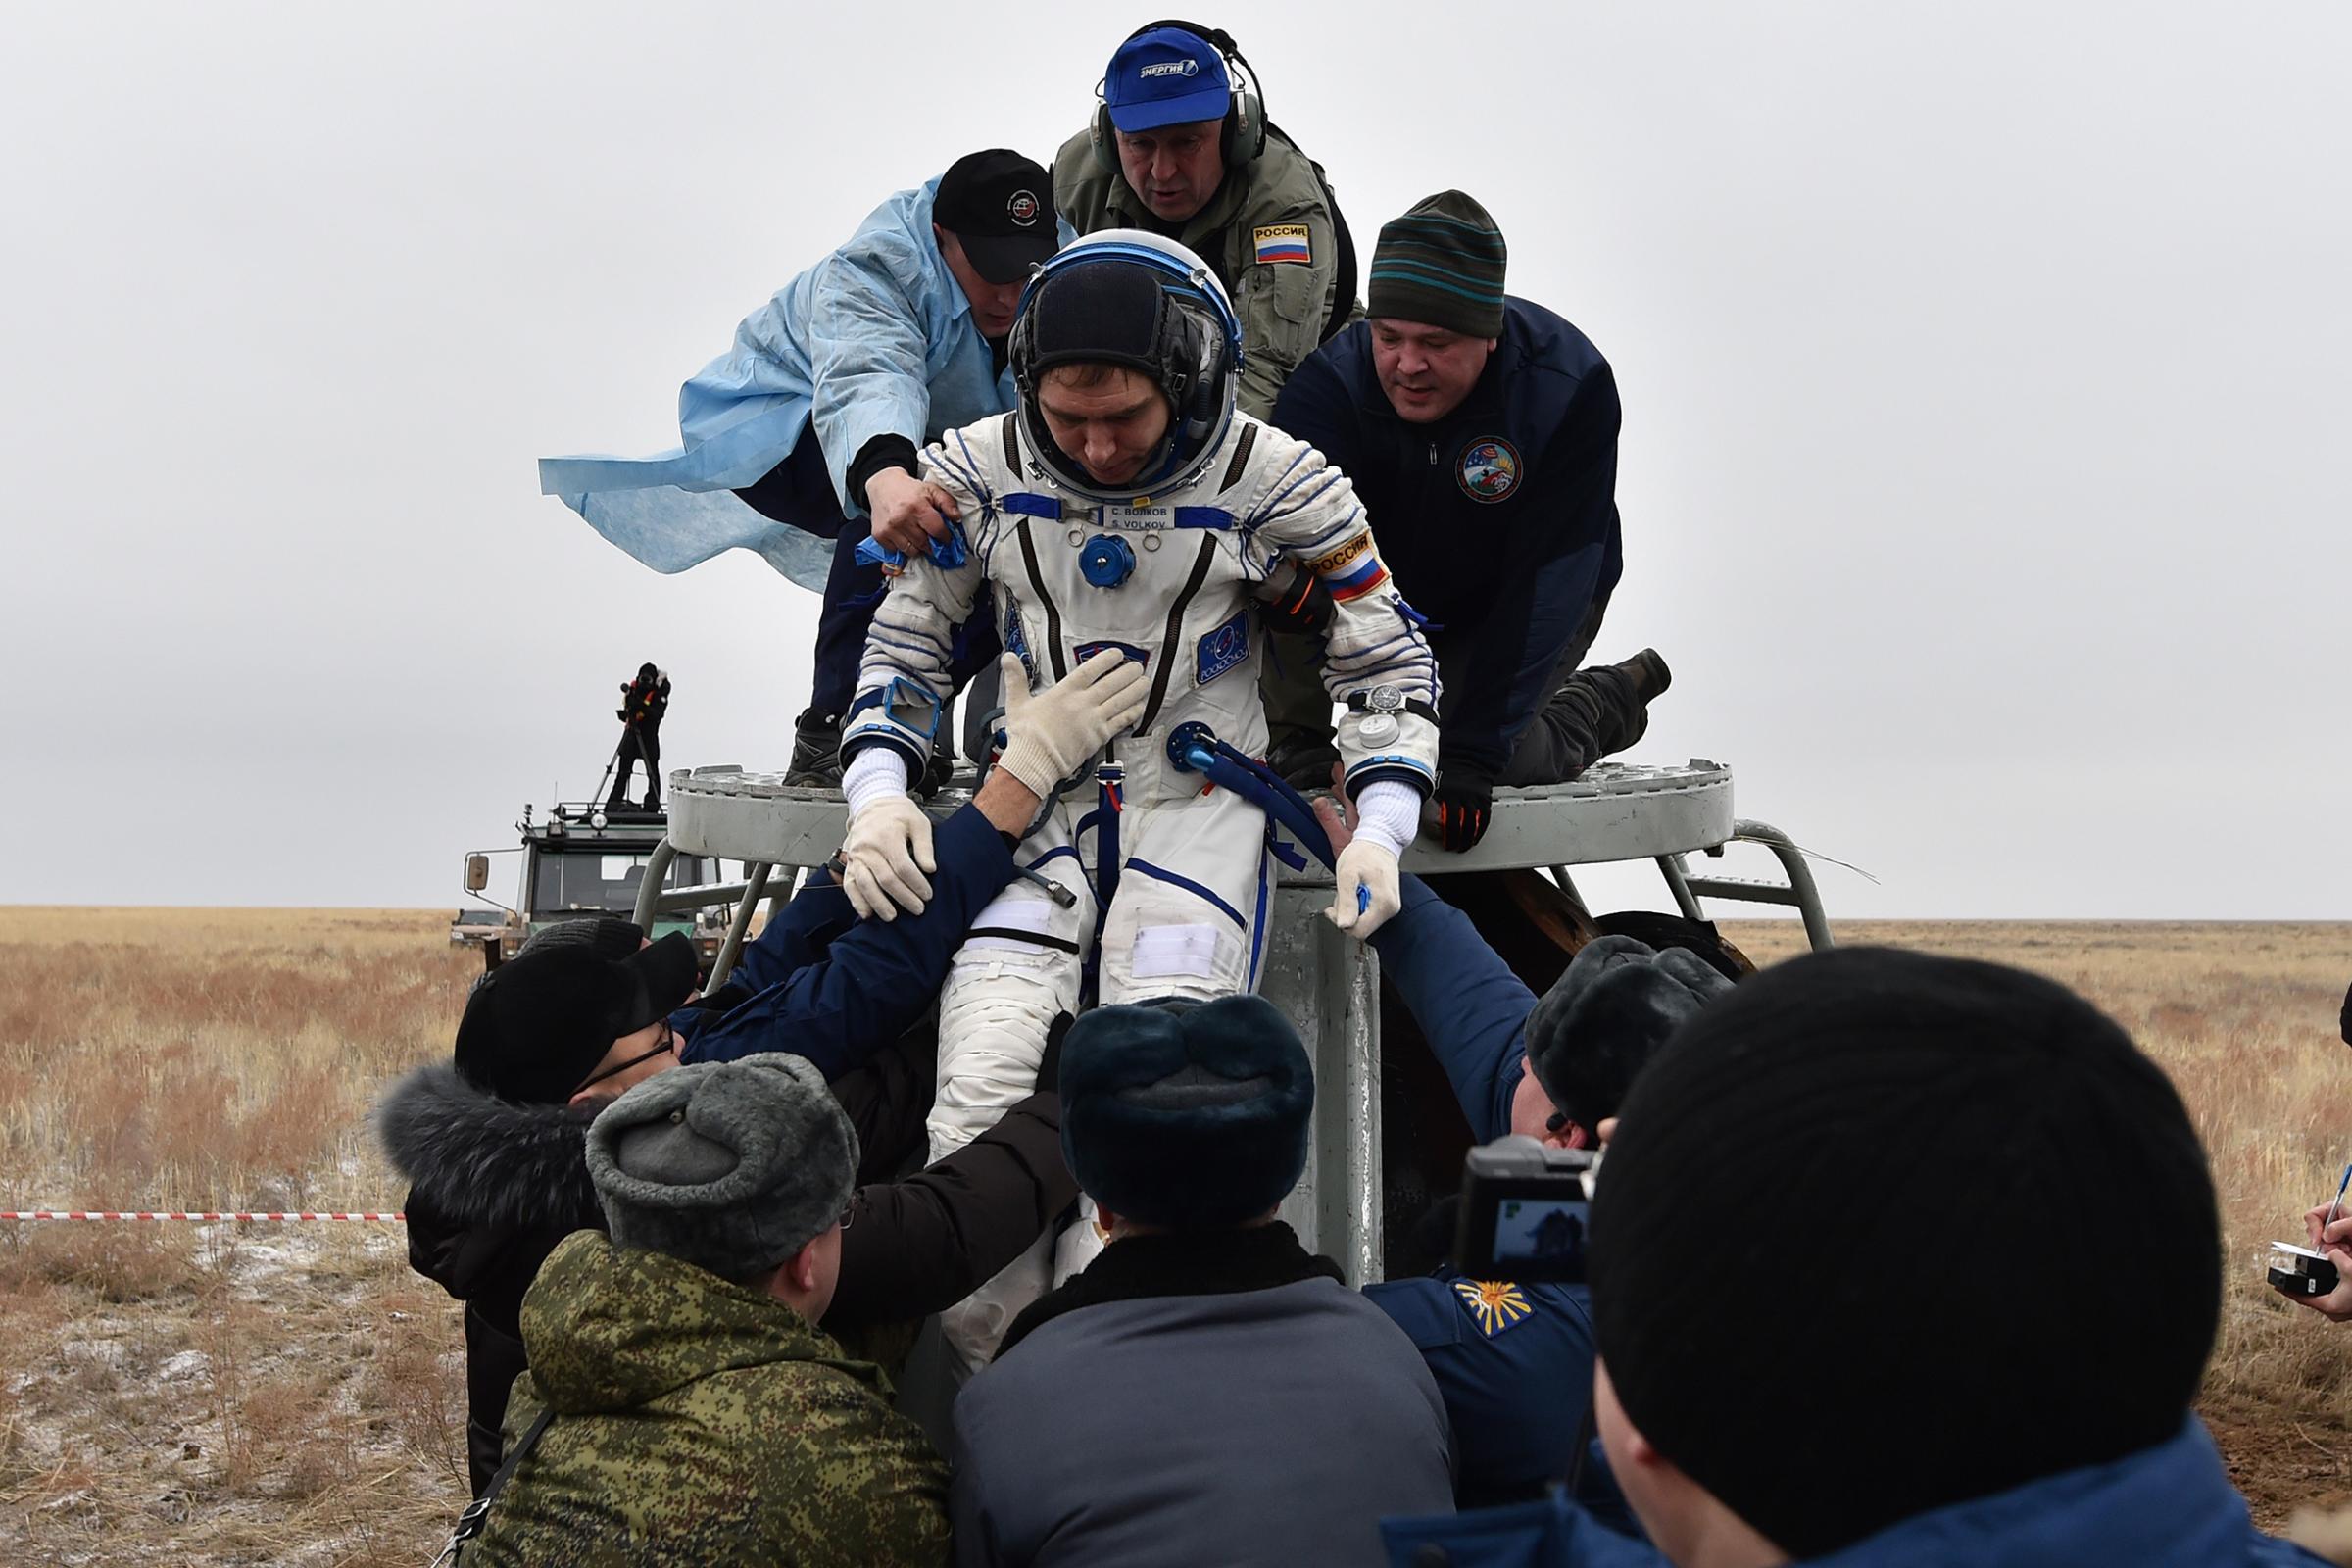 Ground personnel help International Space Station crew member Sergei Volkov of Russia get out of the Soyuz TMA-18M space capsule after landing in Kazakhstan, on March 2, 2016.